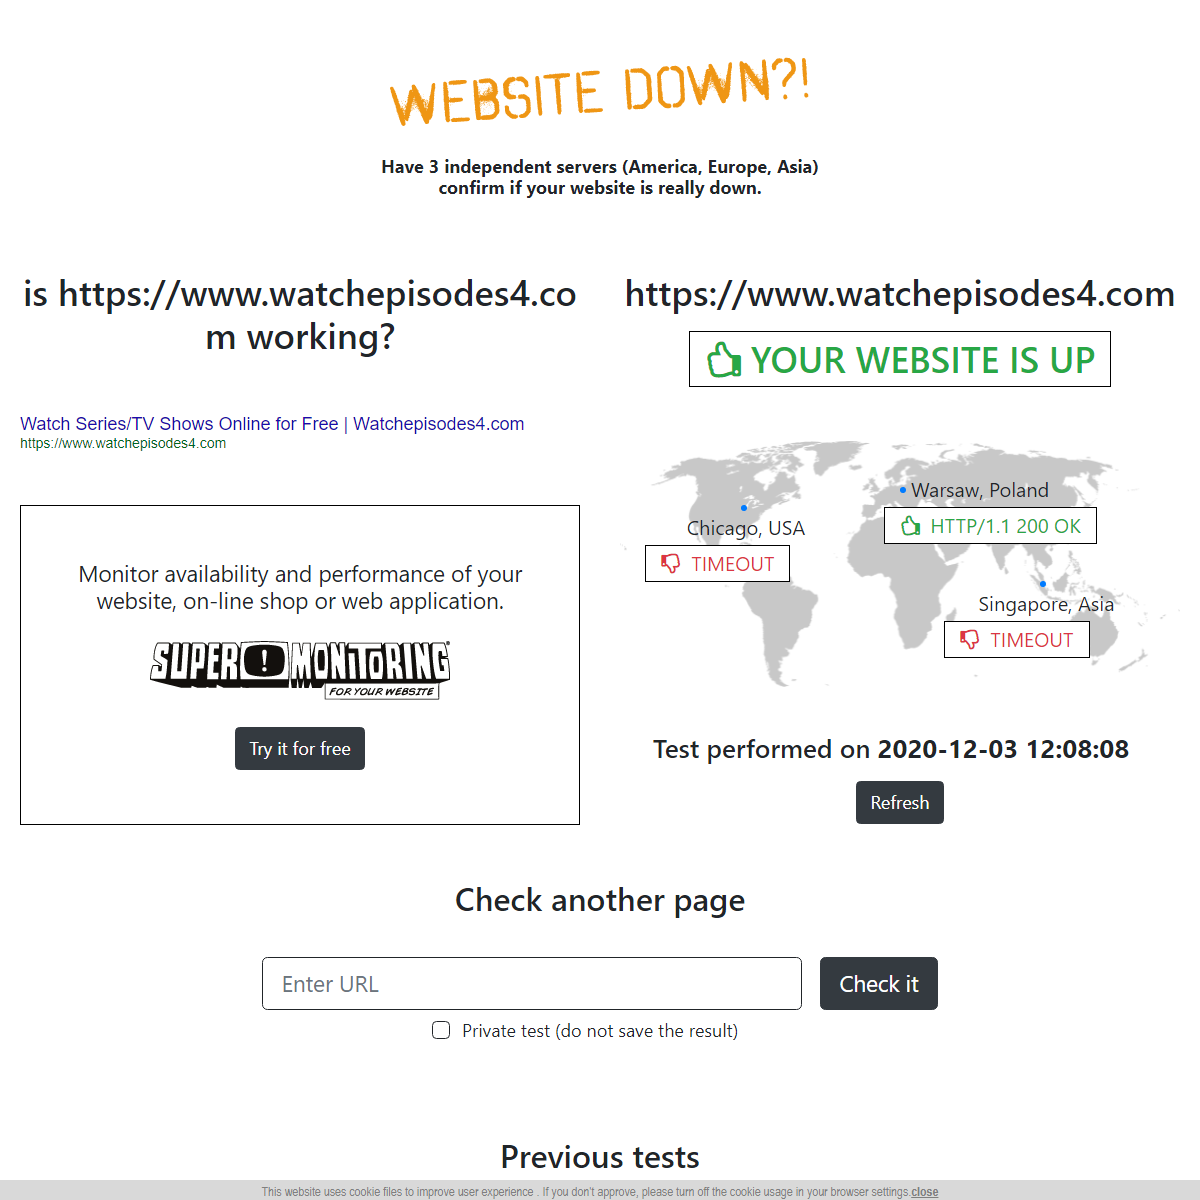 A complete backup of https://www.website-down.com/https%253A%252F%252Fwww.watchepisodes4.com